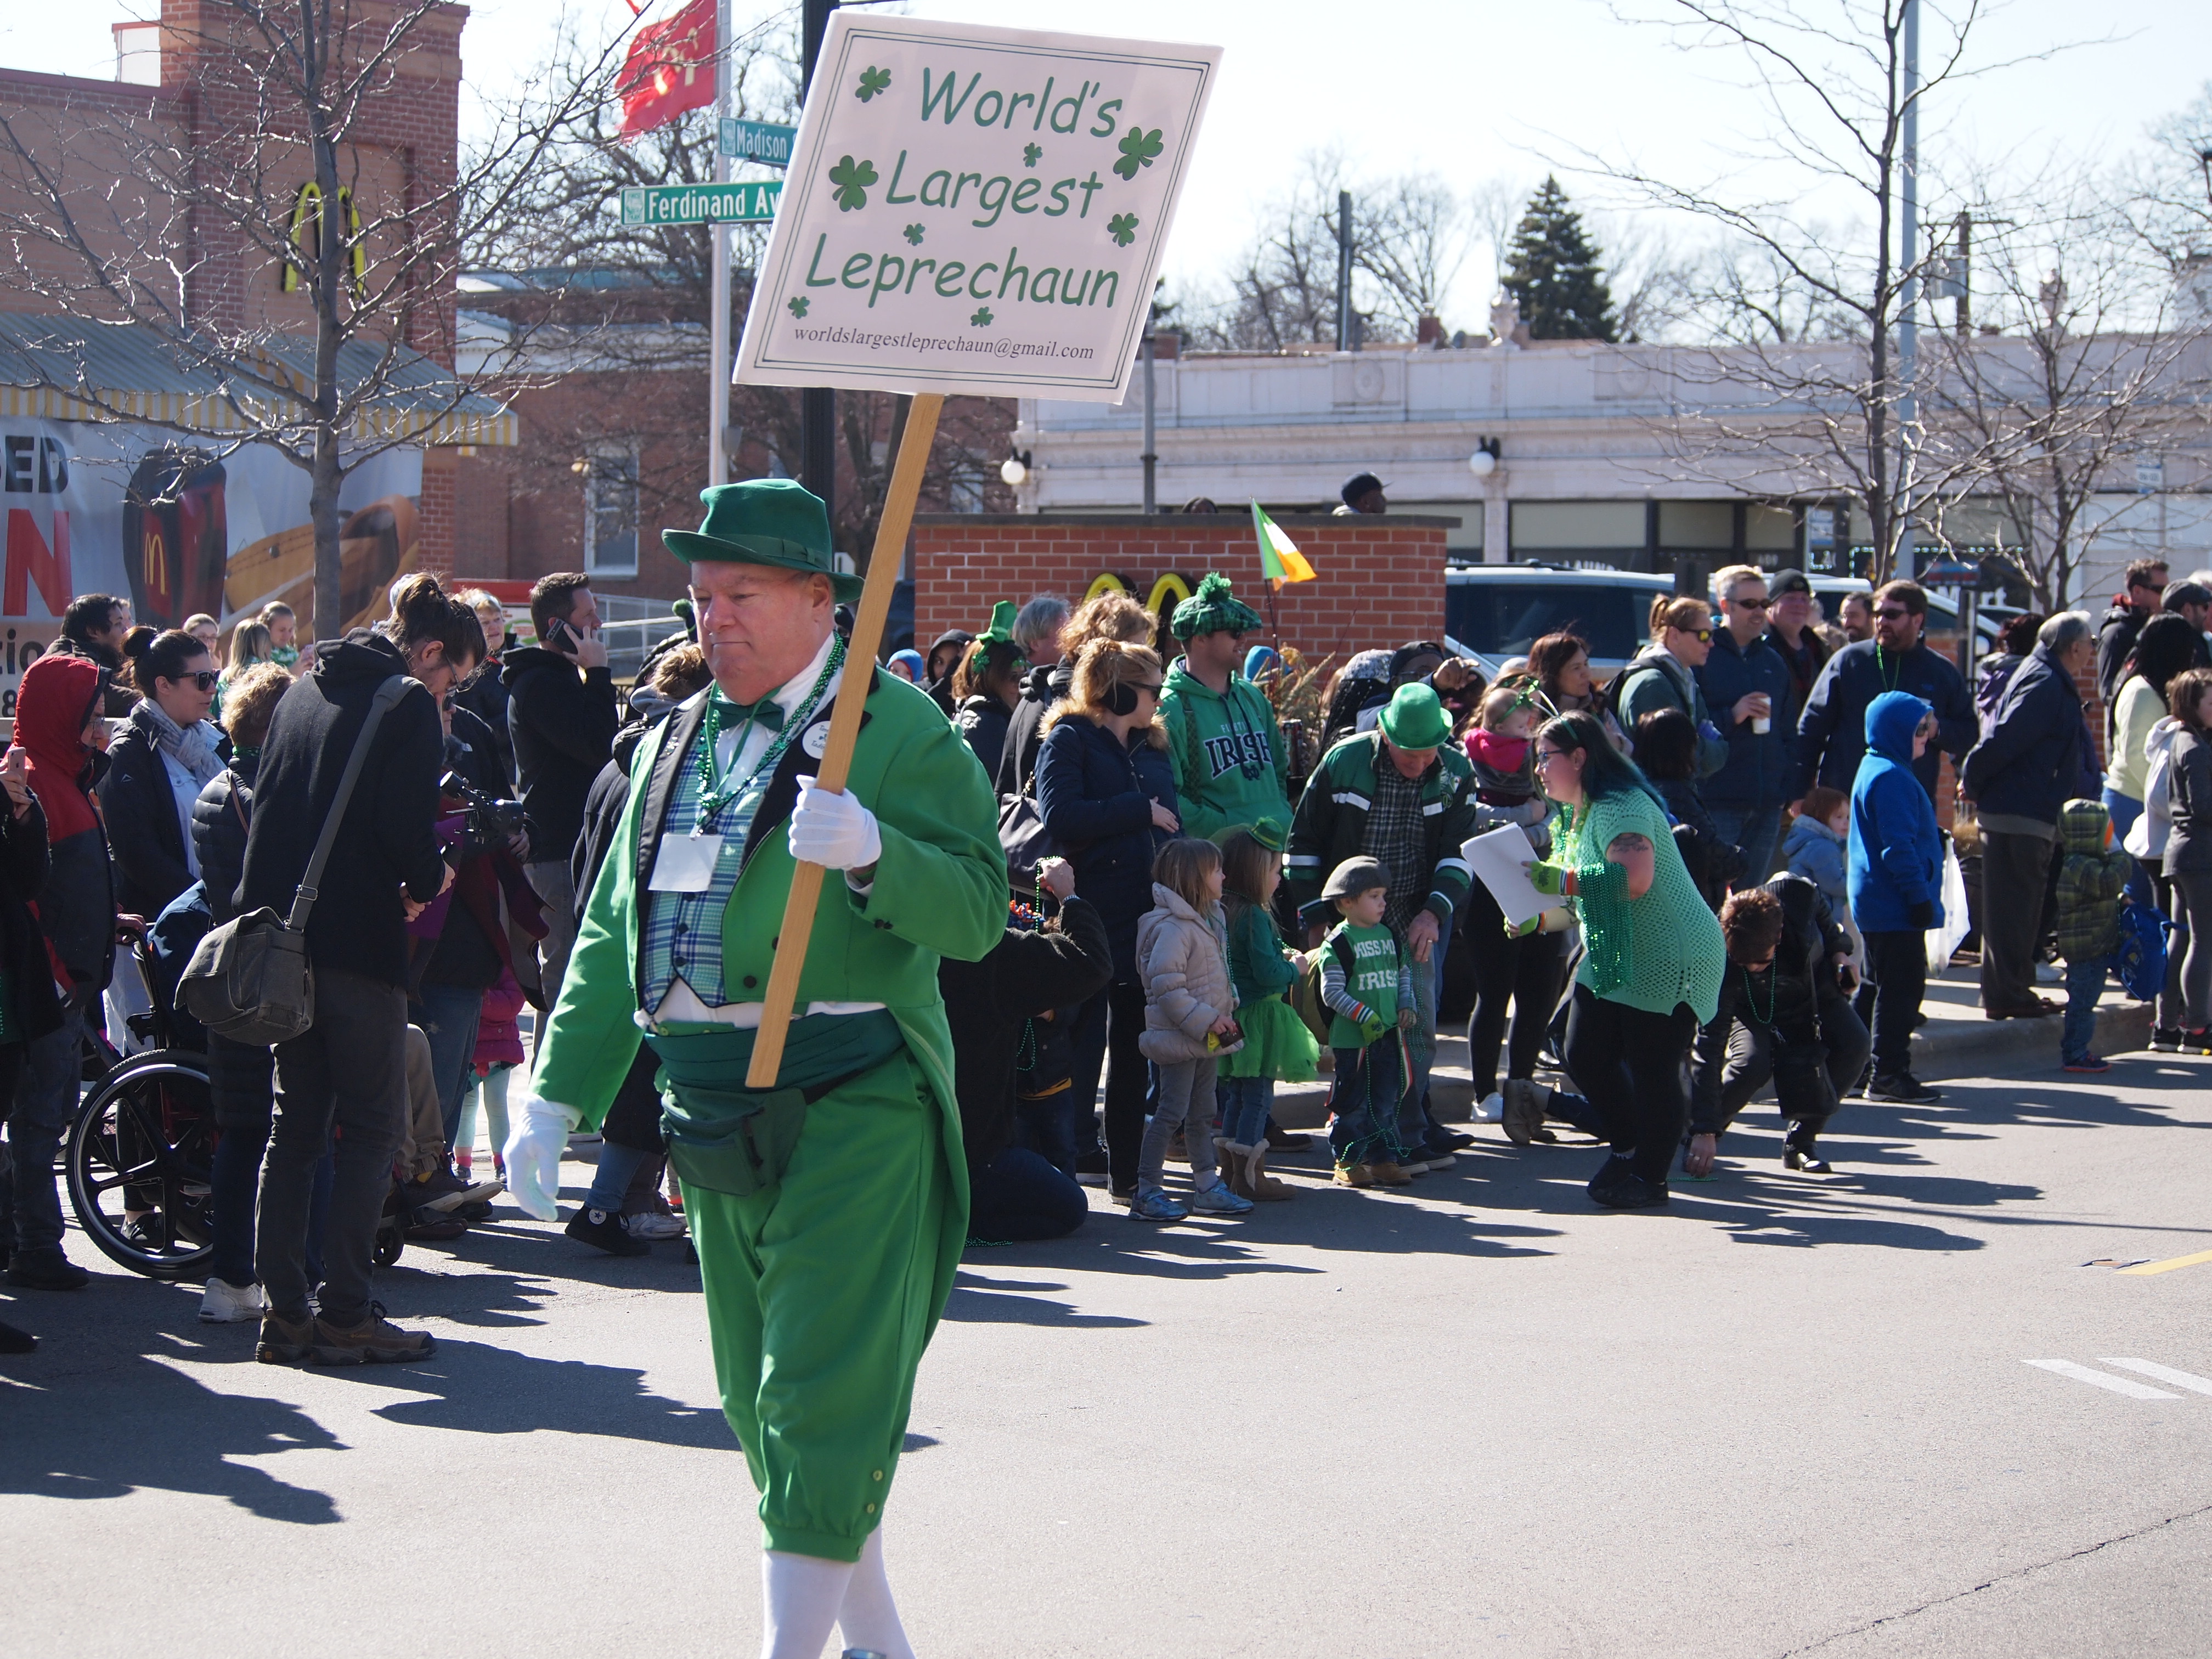 Forest Park kicked off the St. Patrick’s Day season Saturday